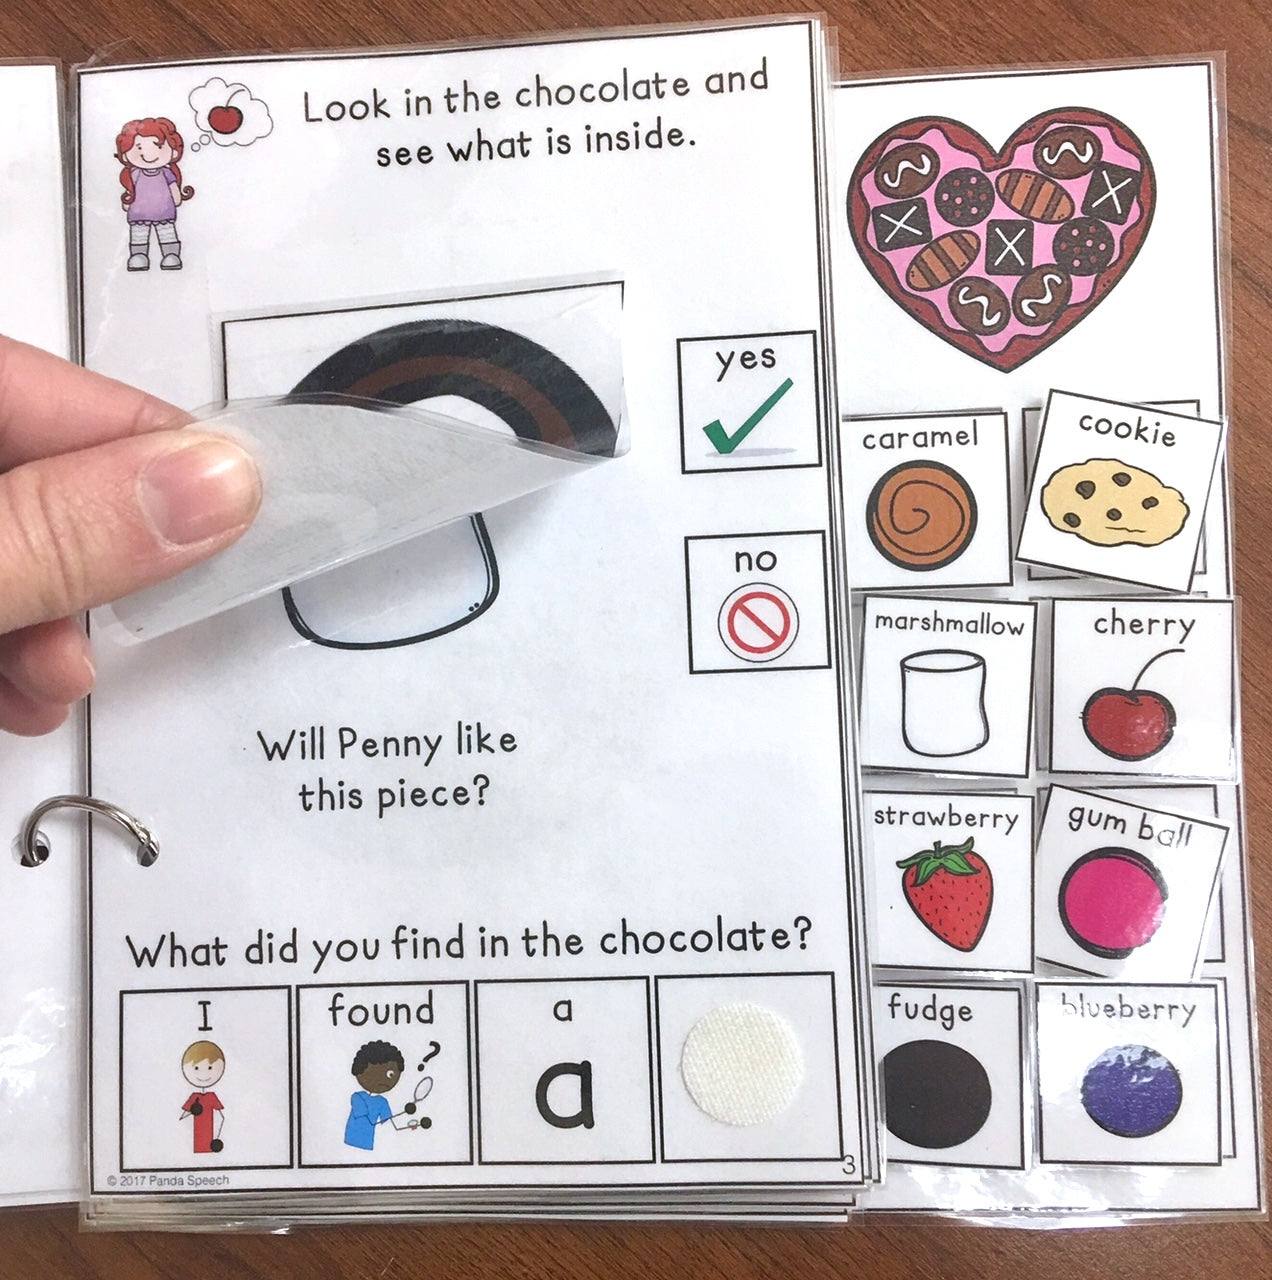 Penny's Chocolate Lift a Flap Book  (Print & Make Book)